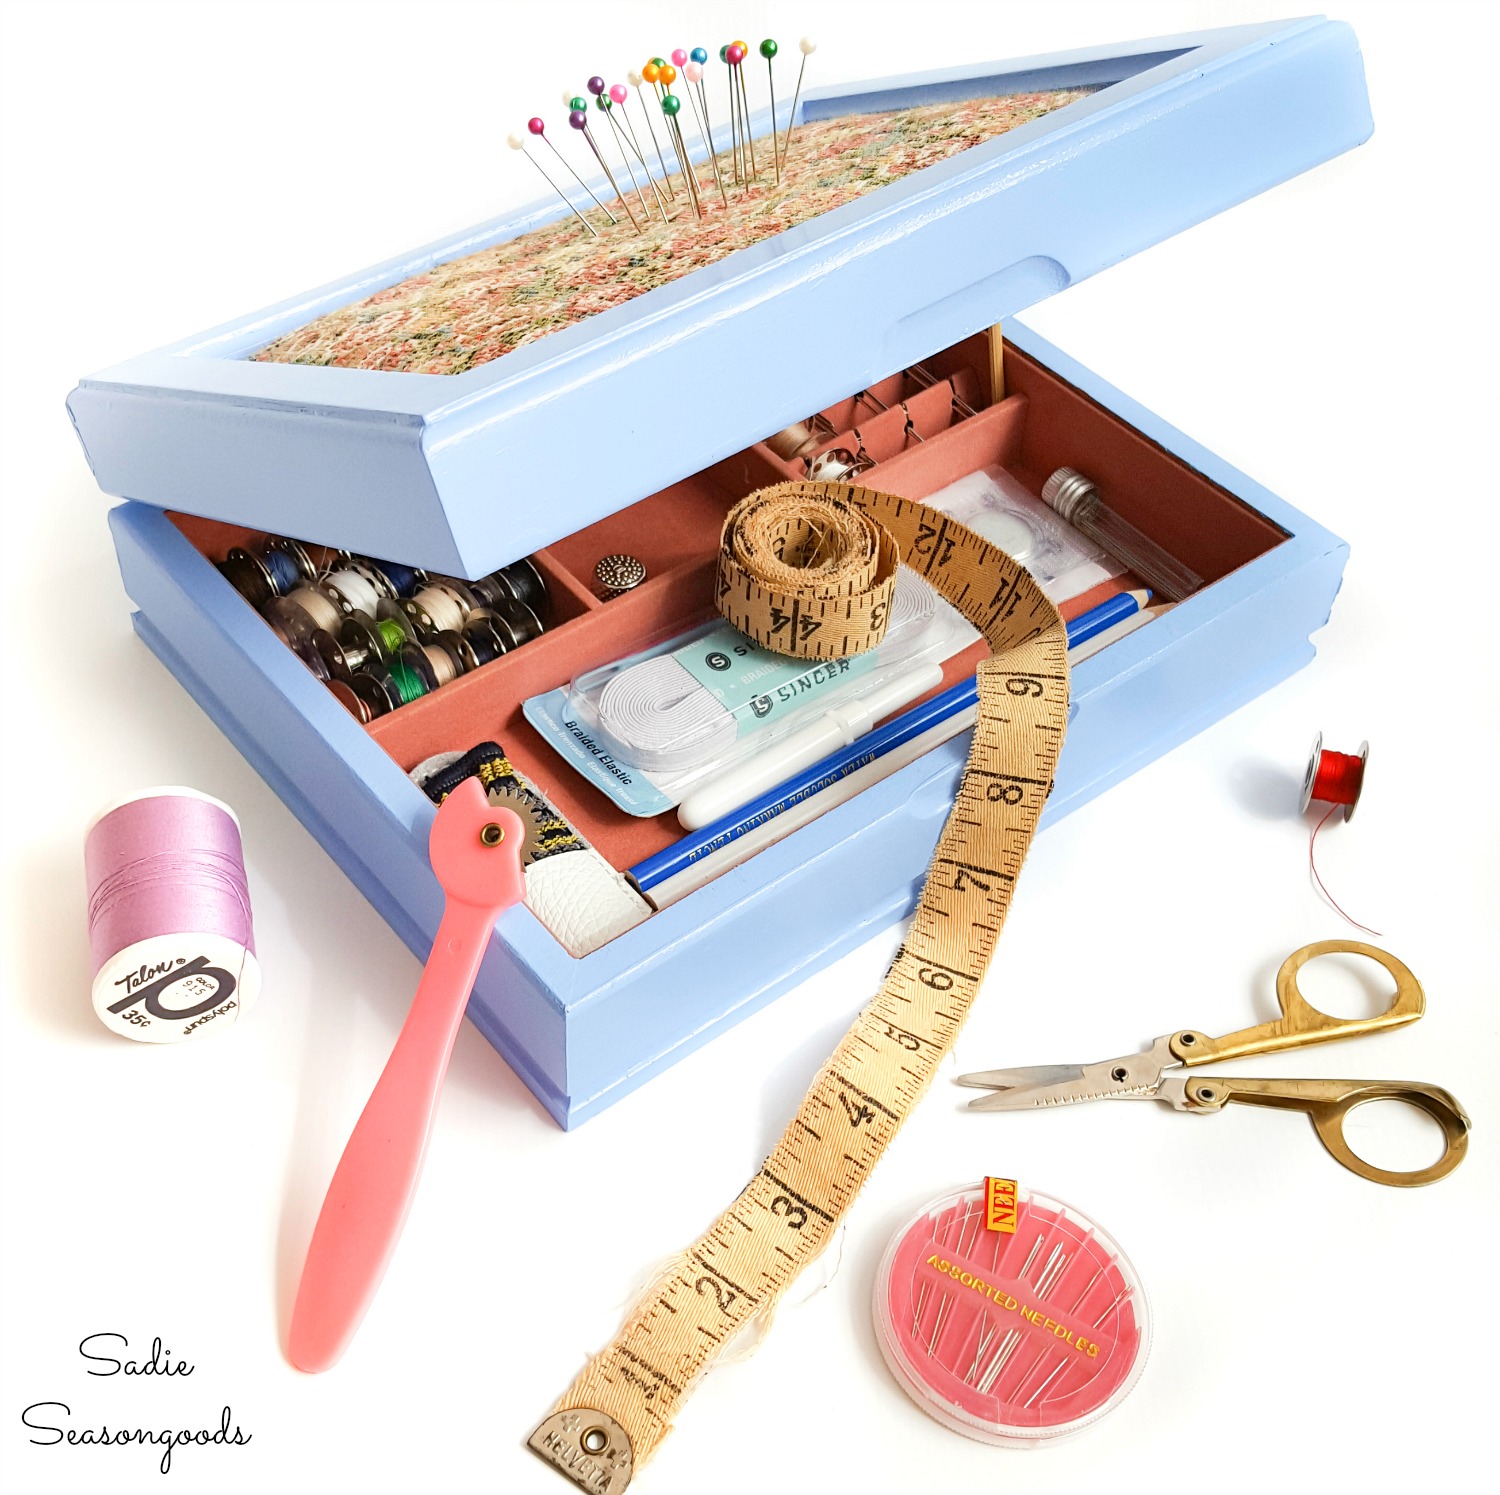 Upcycling a Vintage Jewelry Box as a Sewing Starter Kit